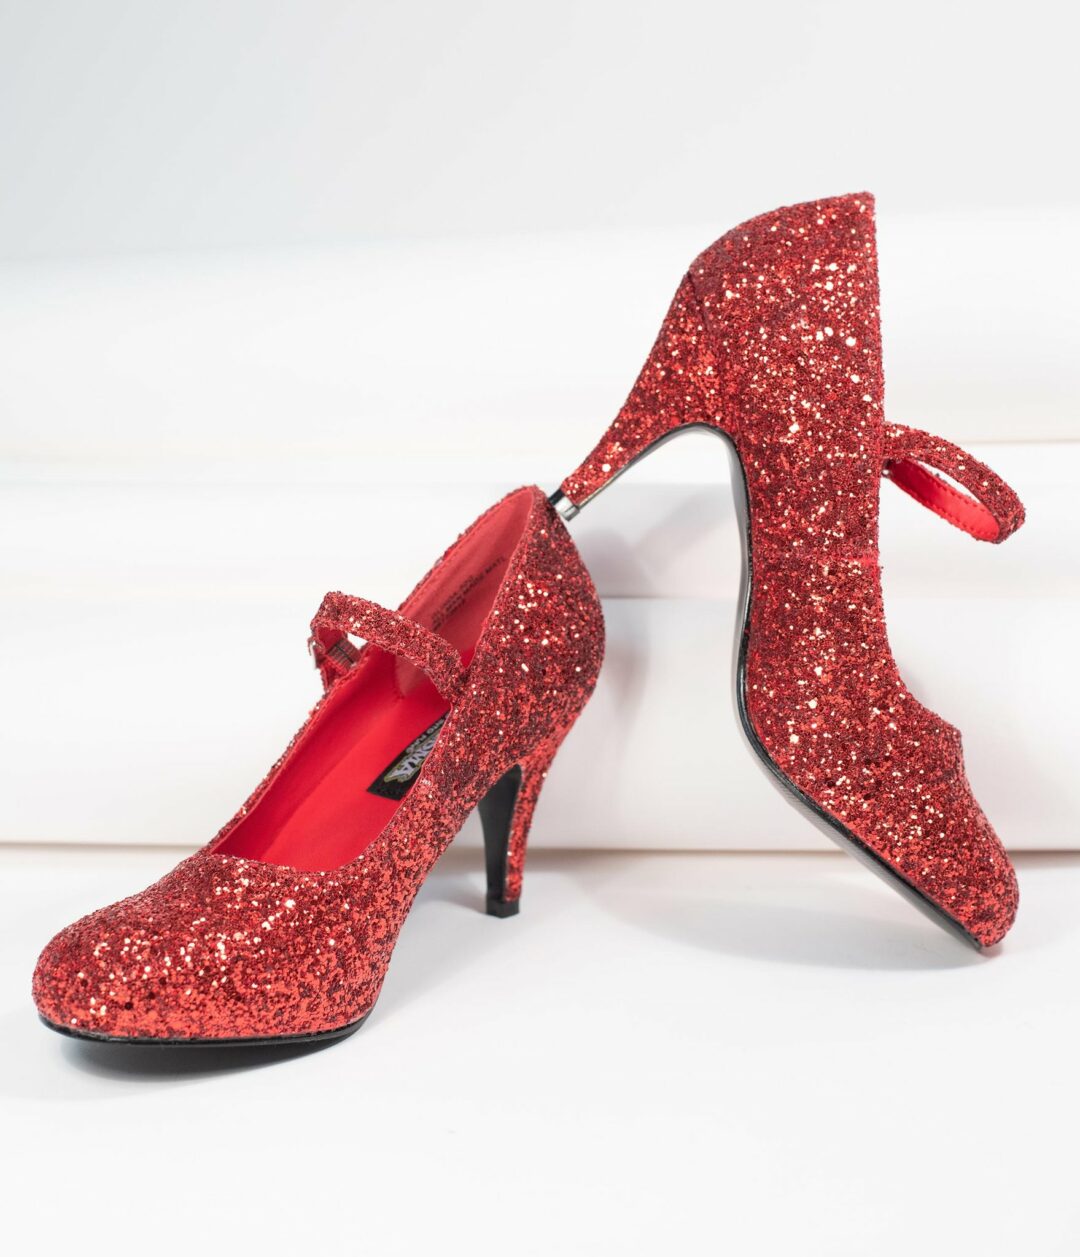 20 pairs of red wedding shoes [UPDATED for 2022!] • Offbeat Wed (was ...